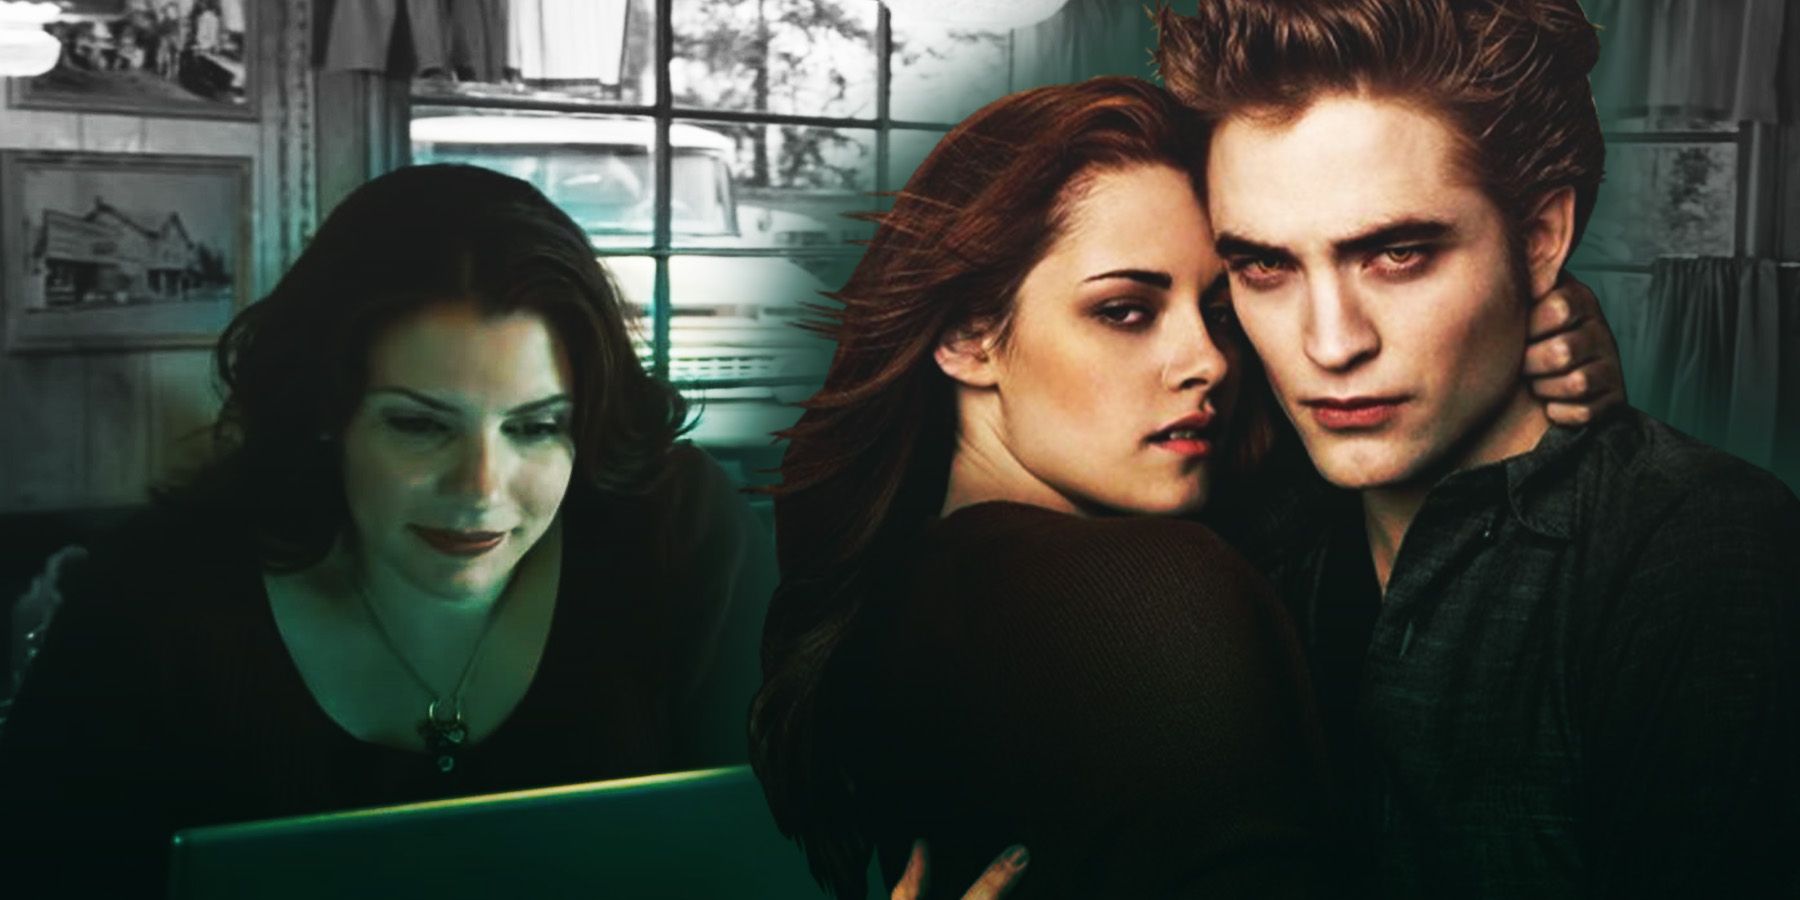 The Twilight author had two cameos in the movies - and they're both perfect